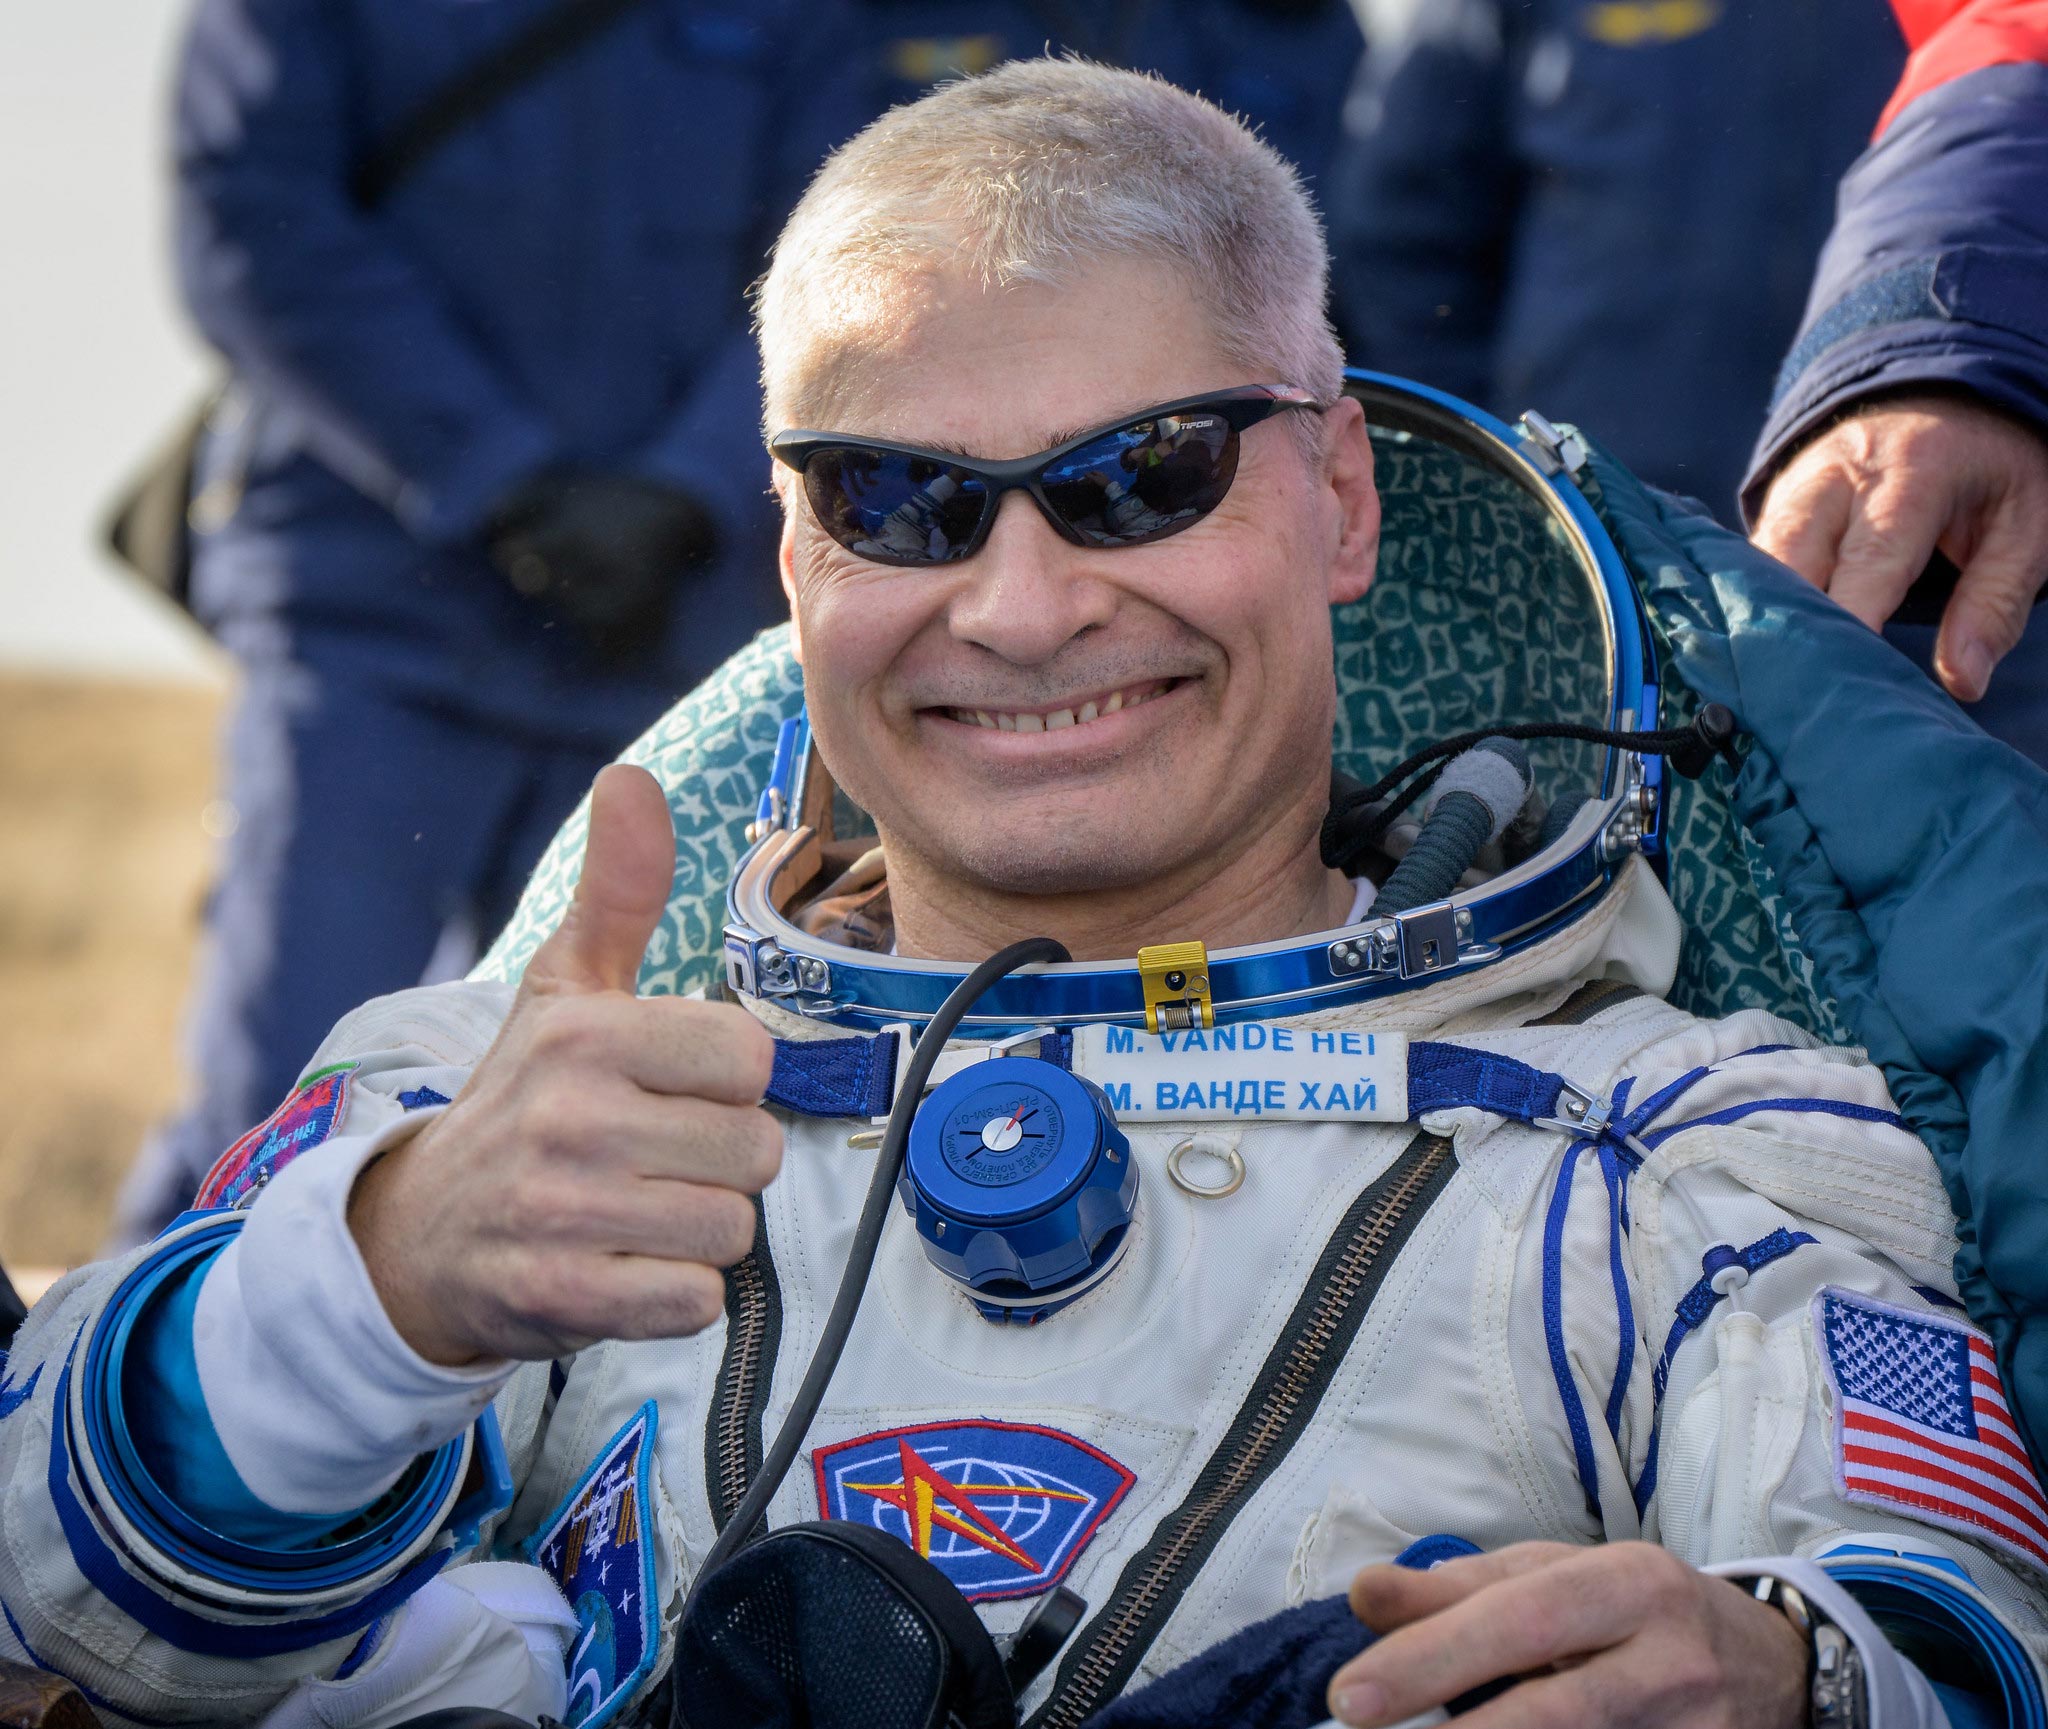 Record-Setting NASA Astronaut and Two Cosmonauts Return From International Space Station – SciTechDaily